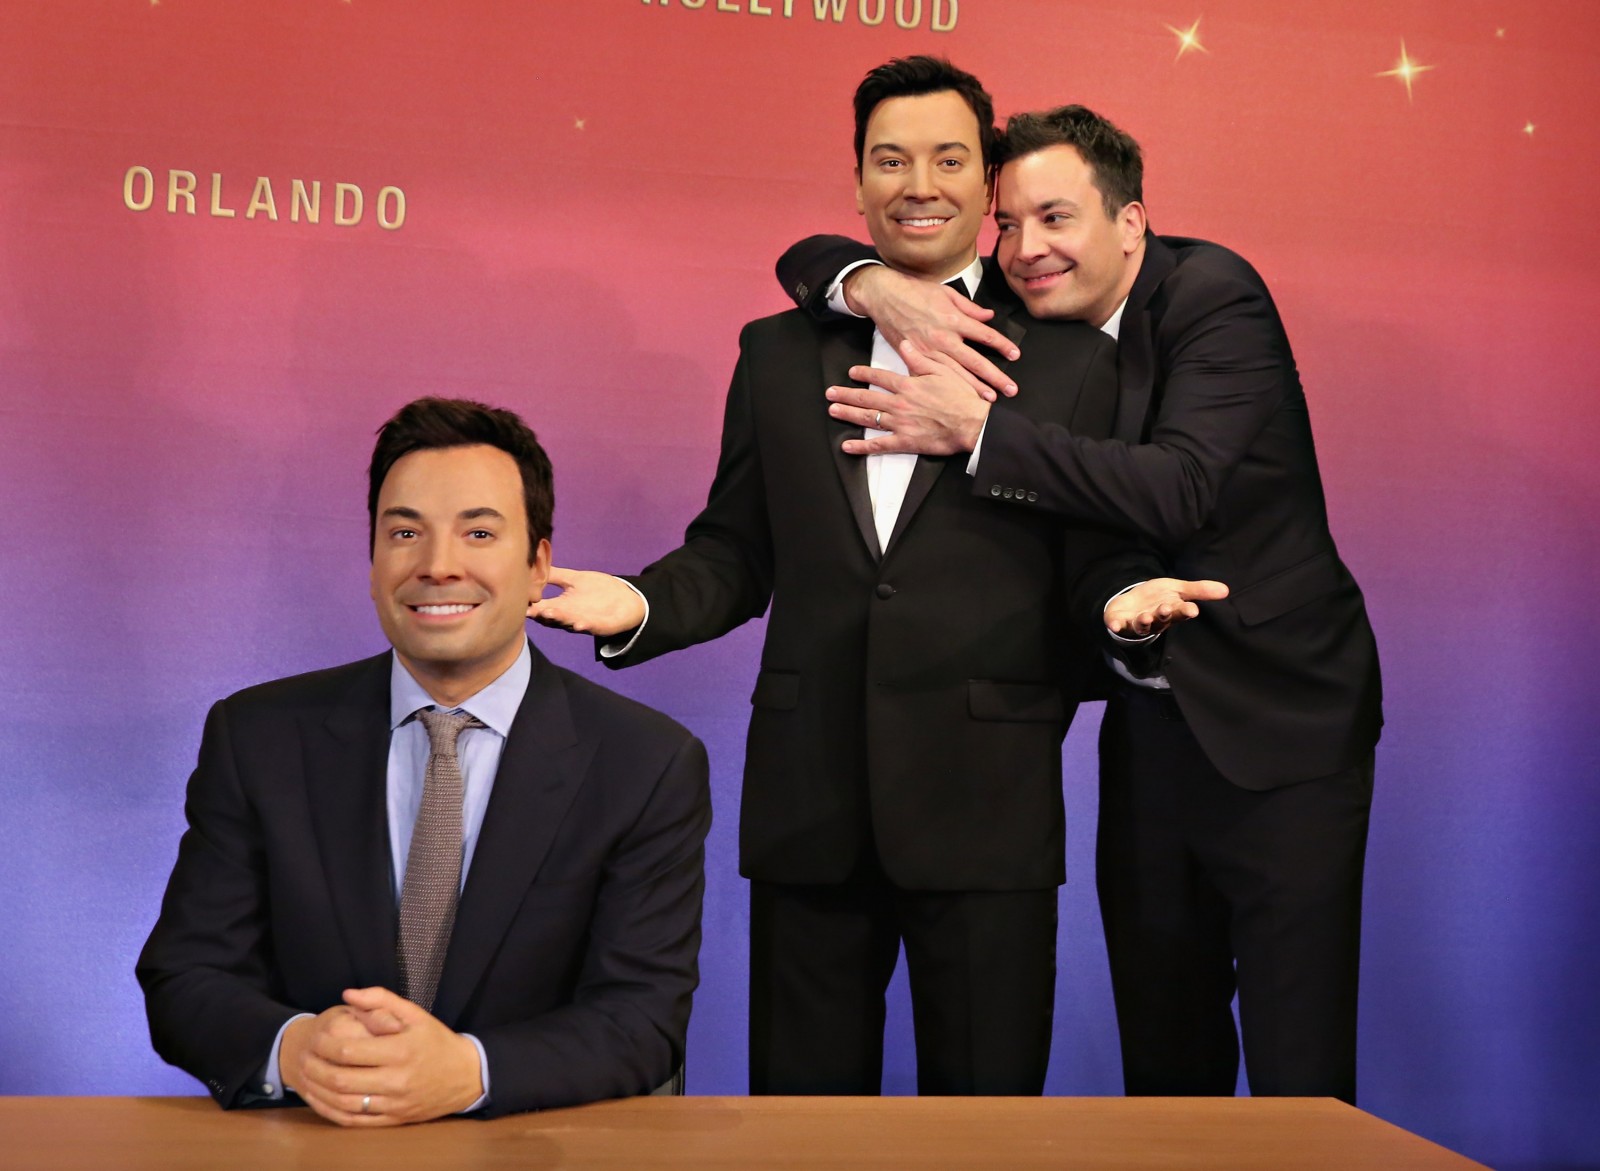 Madame Tussuads And Jimmy Fallon Debut Five Wax Figures At Madame Tussauds New York Madame Tussuads Orlando